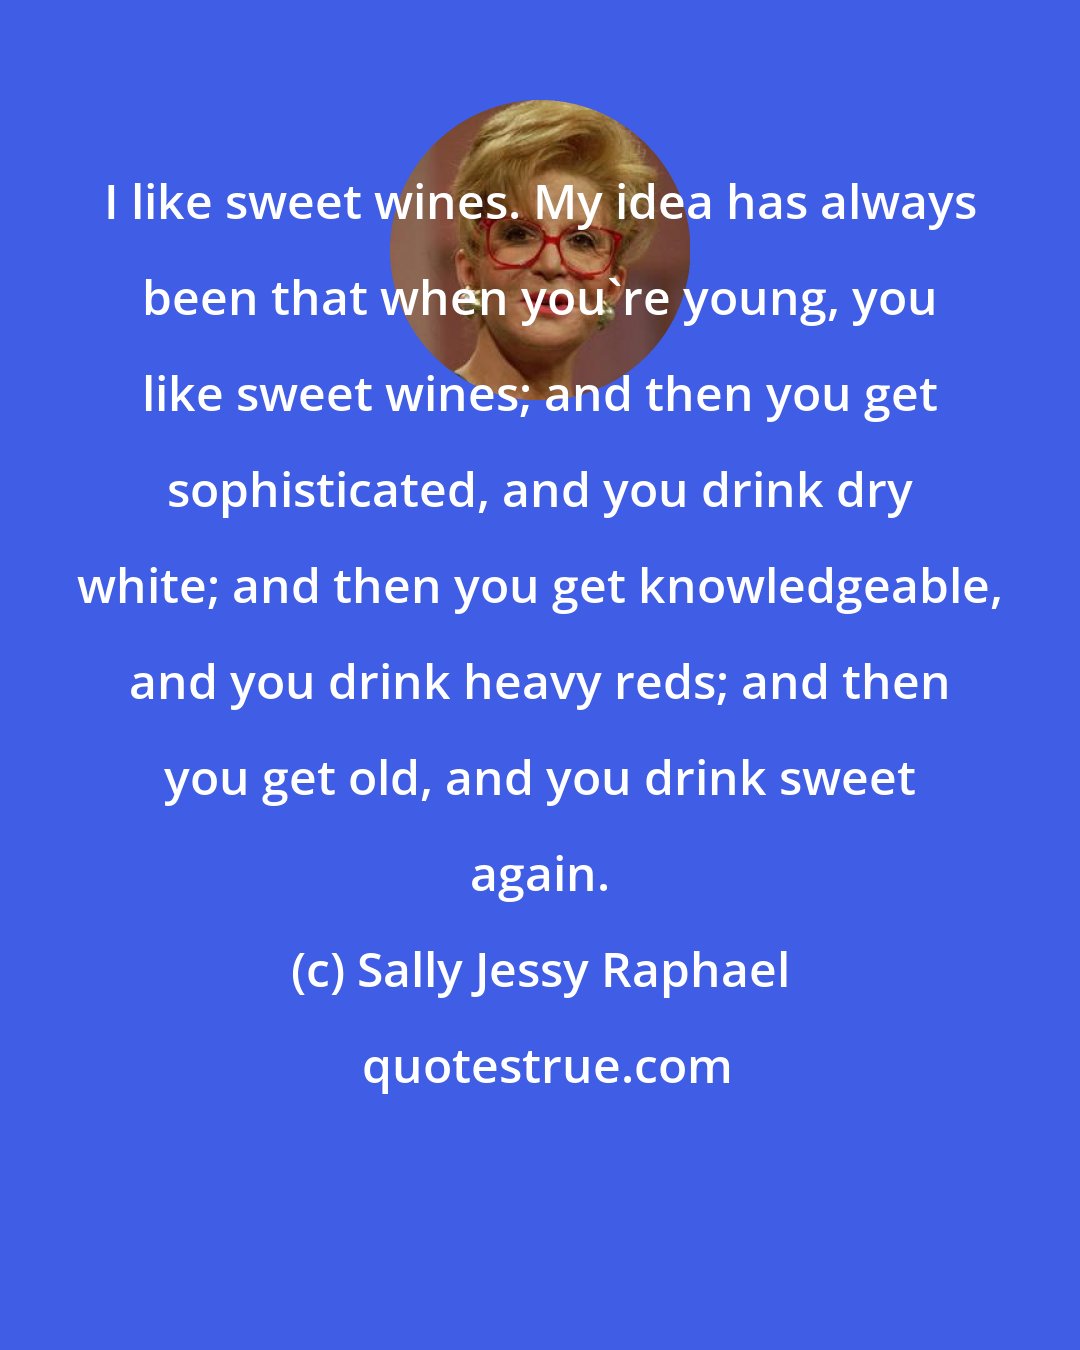 Sally Jessy Raphael: I like sweet wines. My idea has always been that when you're young, you like sweet wines; and then you get sophisticated, and you drink dry white; and then you get knowledgeable, and you drink heavy reds; and then you get old, and you drink sweet again.